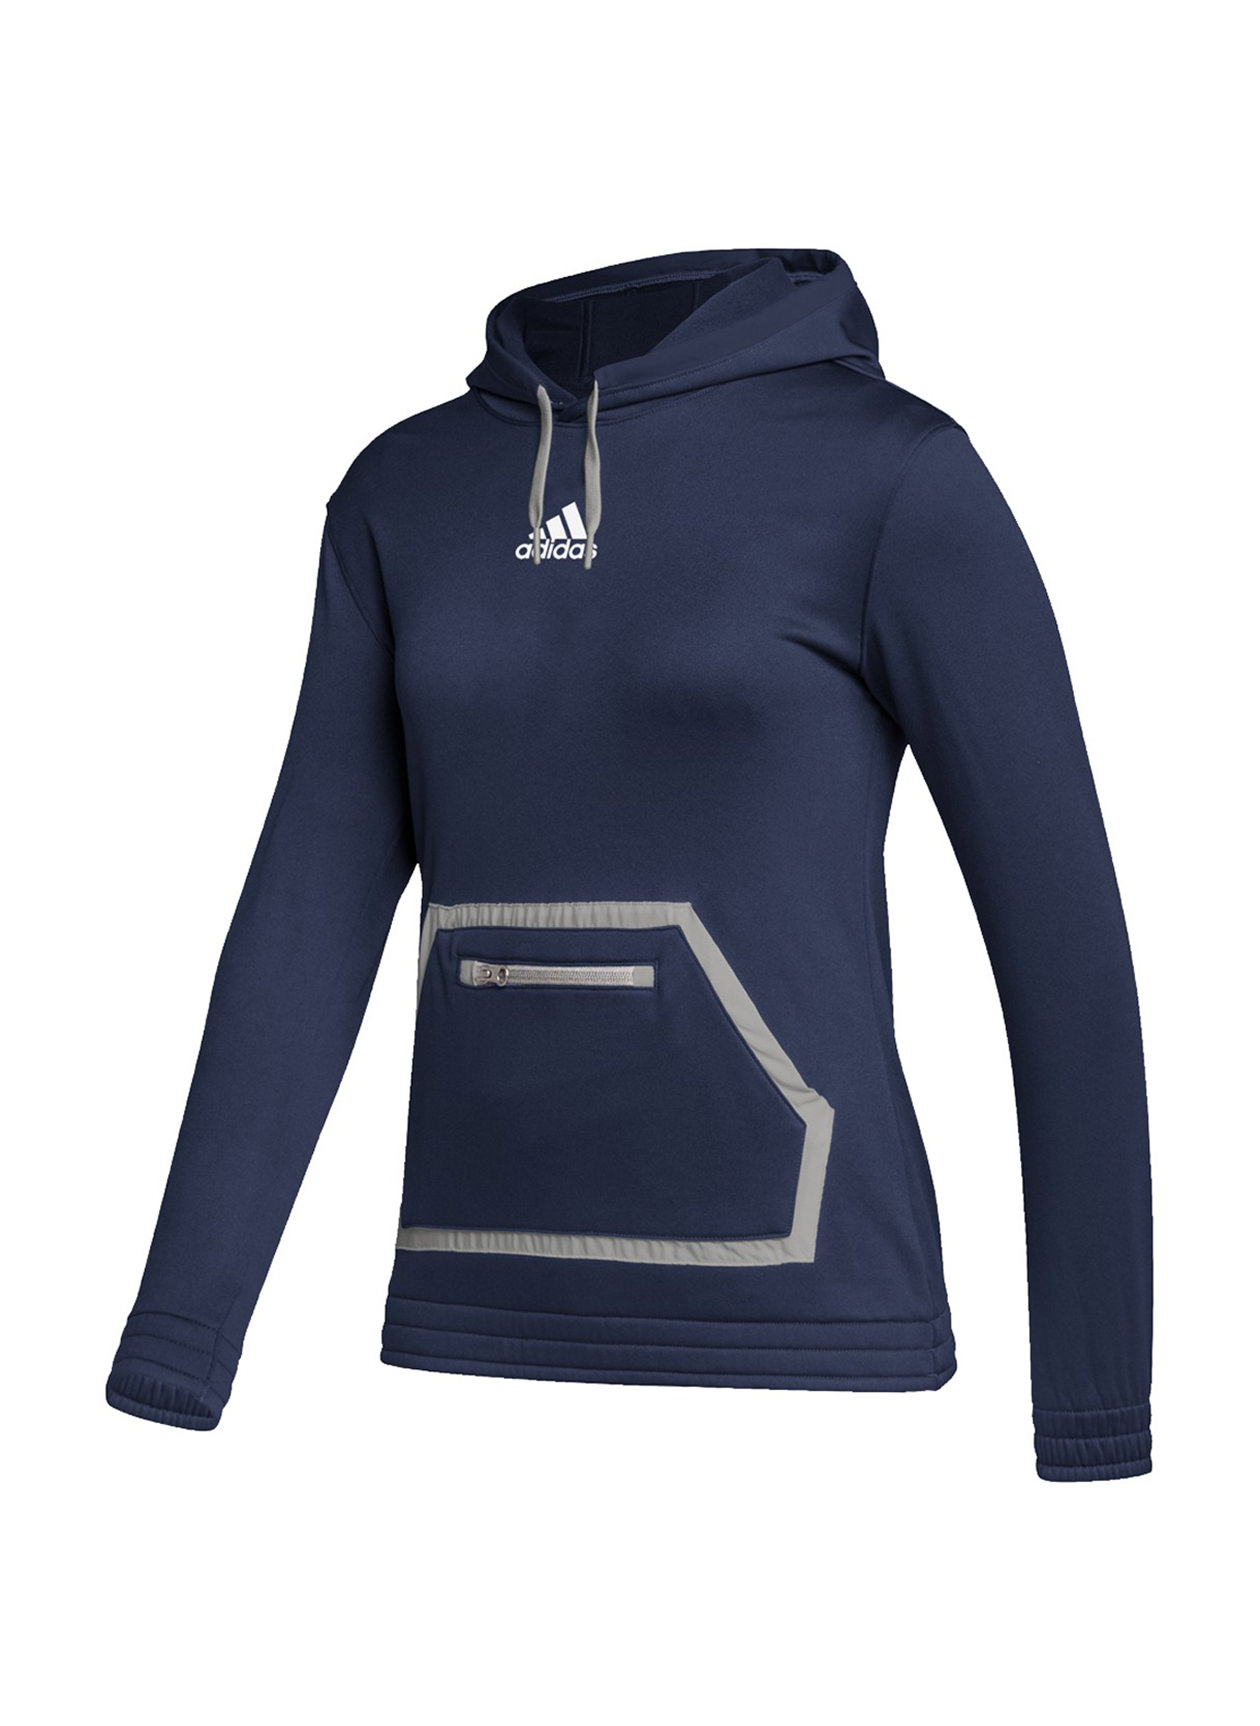 Adidas Women's Team Navy Blue/MGH Solid Grey Team Issue Pullover Hoodie